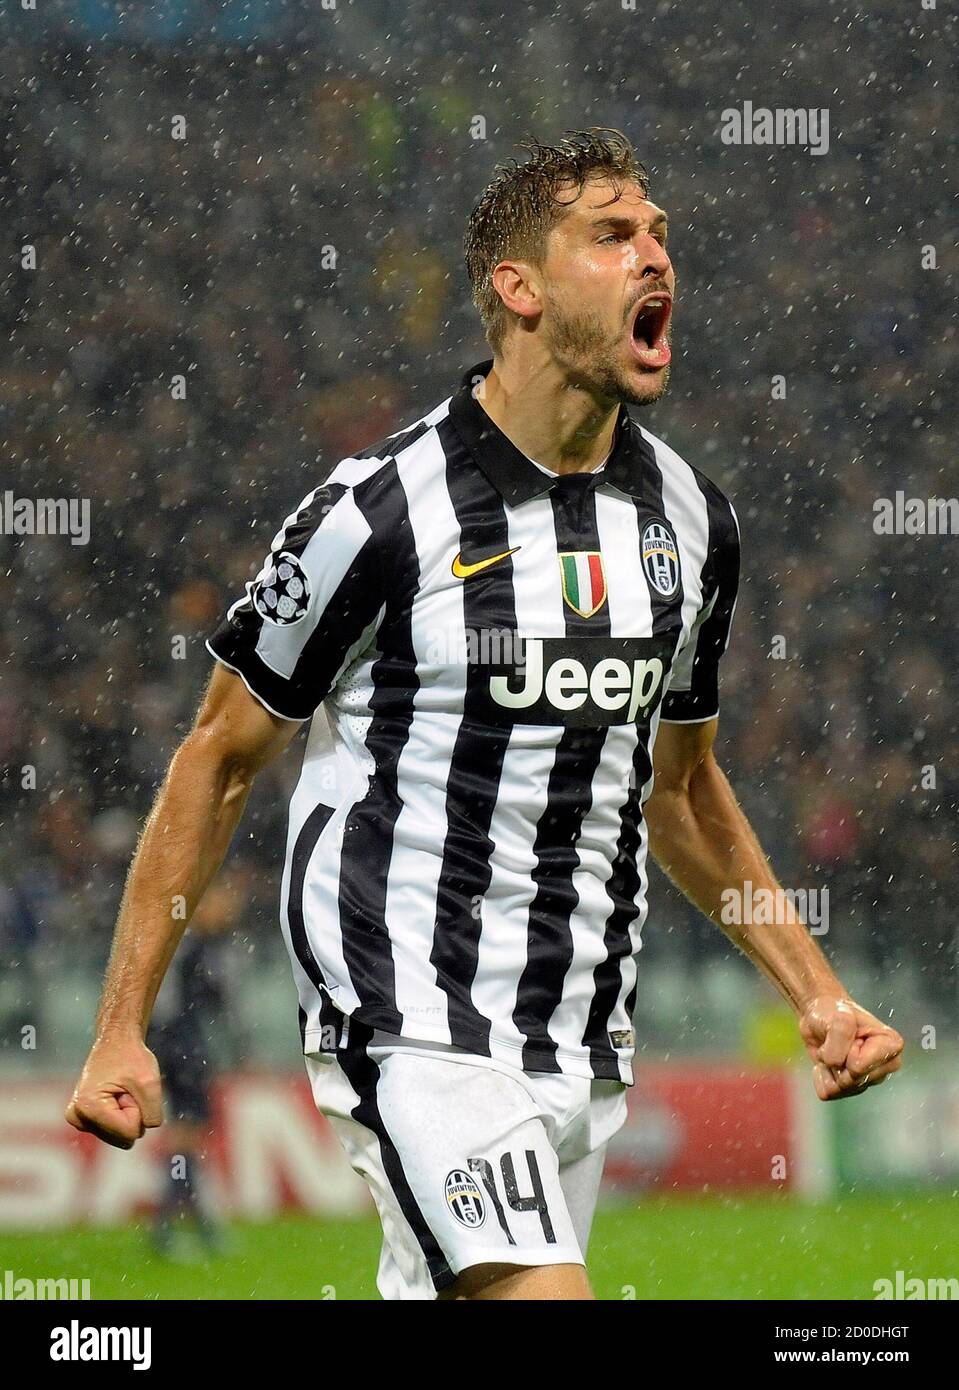 Juventus' Fernando Llorente celebrates after scoring against Olympiakos'  during their Champions League soccer match at Juventus stadium in Turin,  November 4, 2014. REUTERS/Giorgio Perottino (ITALY - Tags: SPORT SOCCER  Stock Photo - Alamy